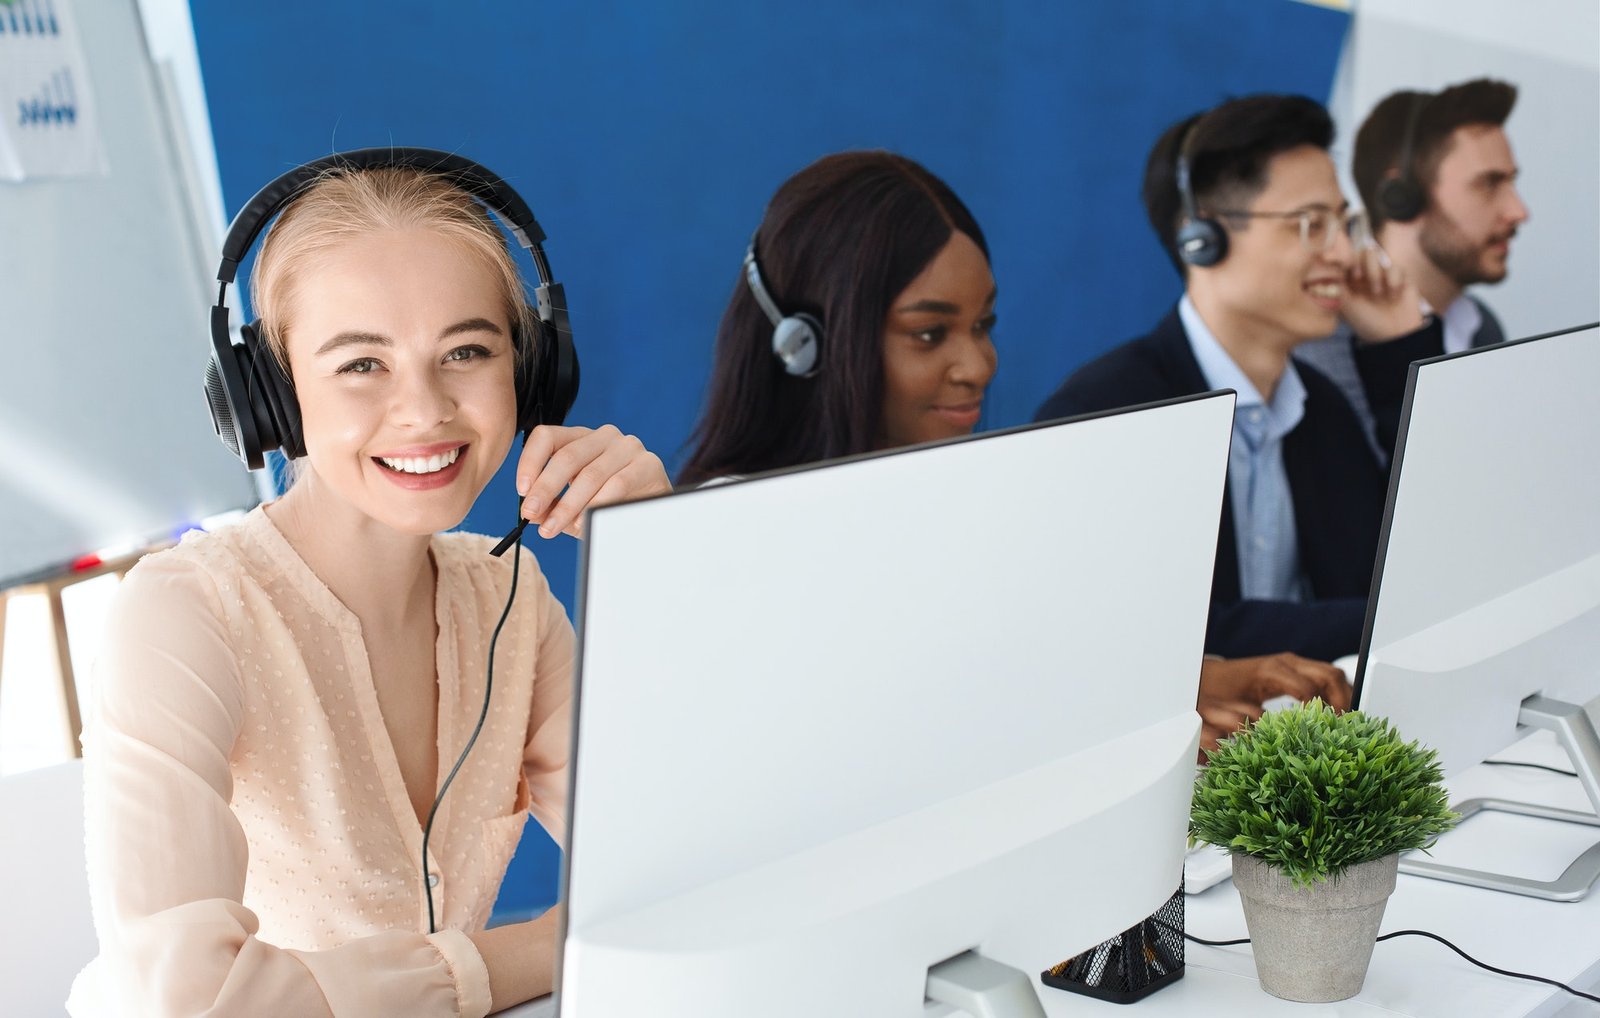 joyful-customer-service-agents-with-headphones-communicating-with-clients-at-call-center.jpg